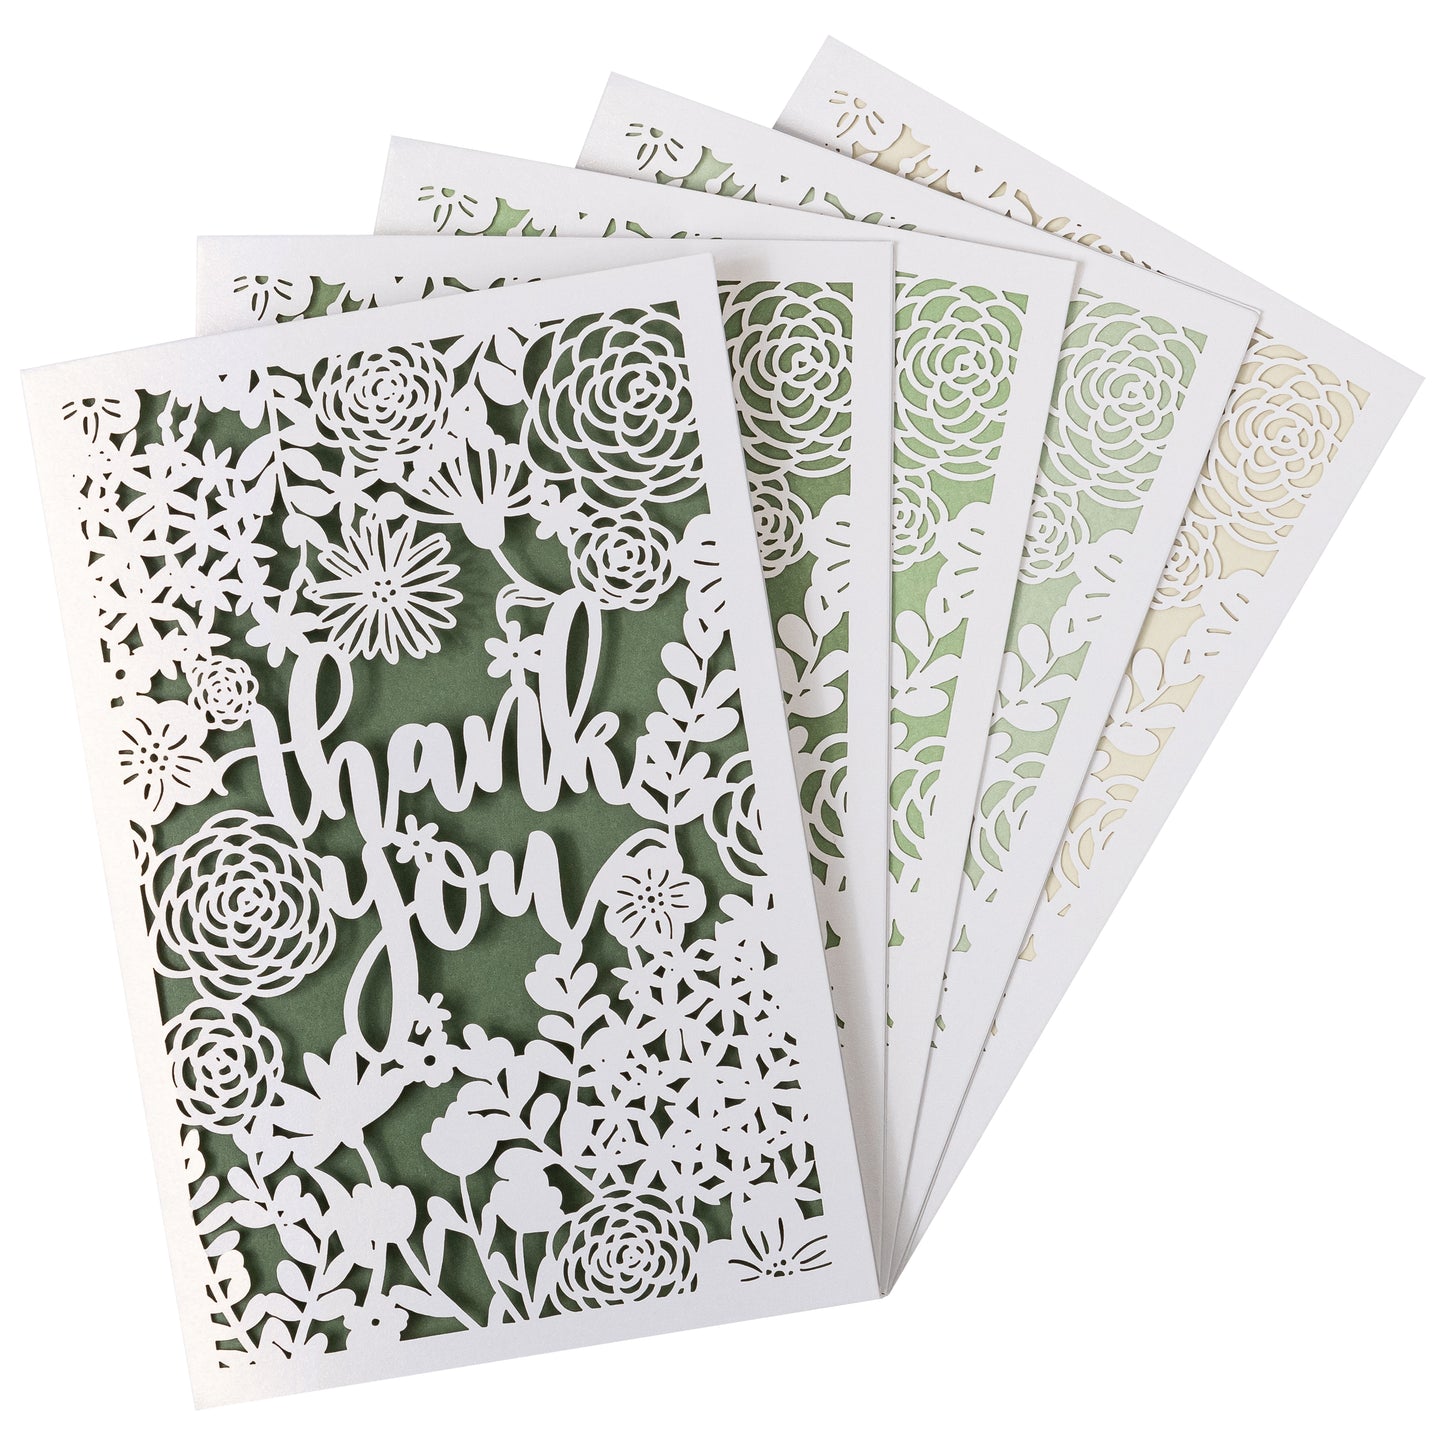 Crisky Hollow Cutting Thank You Cards 5 Assortment, Greenery Plants Design (25 Cards with Envelopes for Birthday, Baby Shower, Bridal Shower, Wedding, All Occasion)